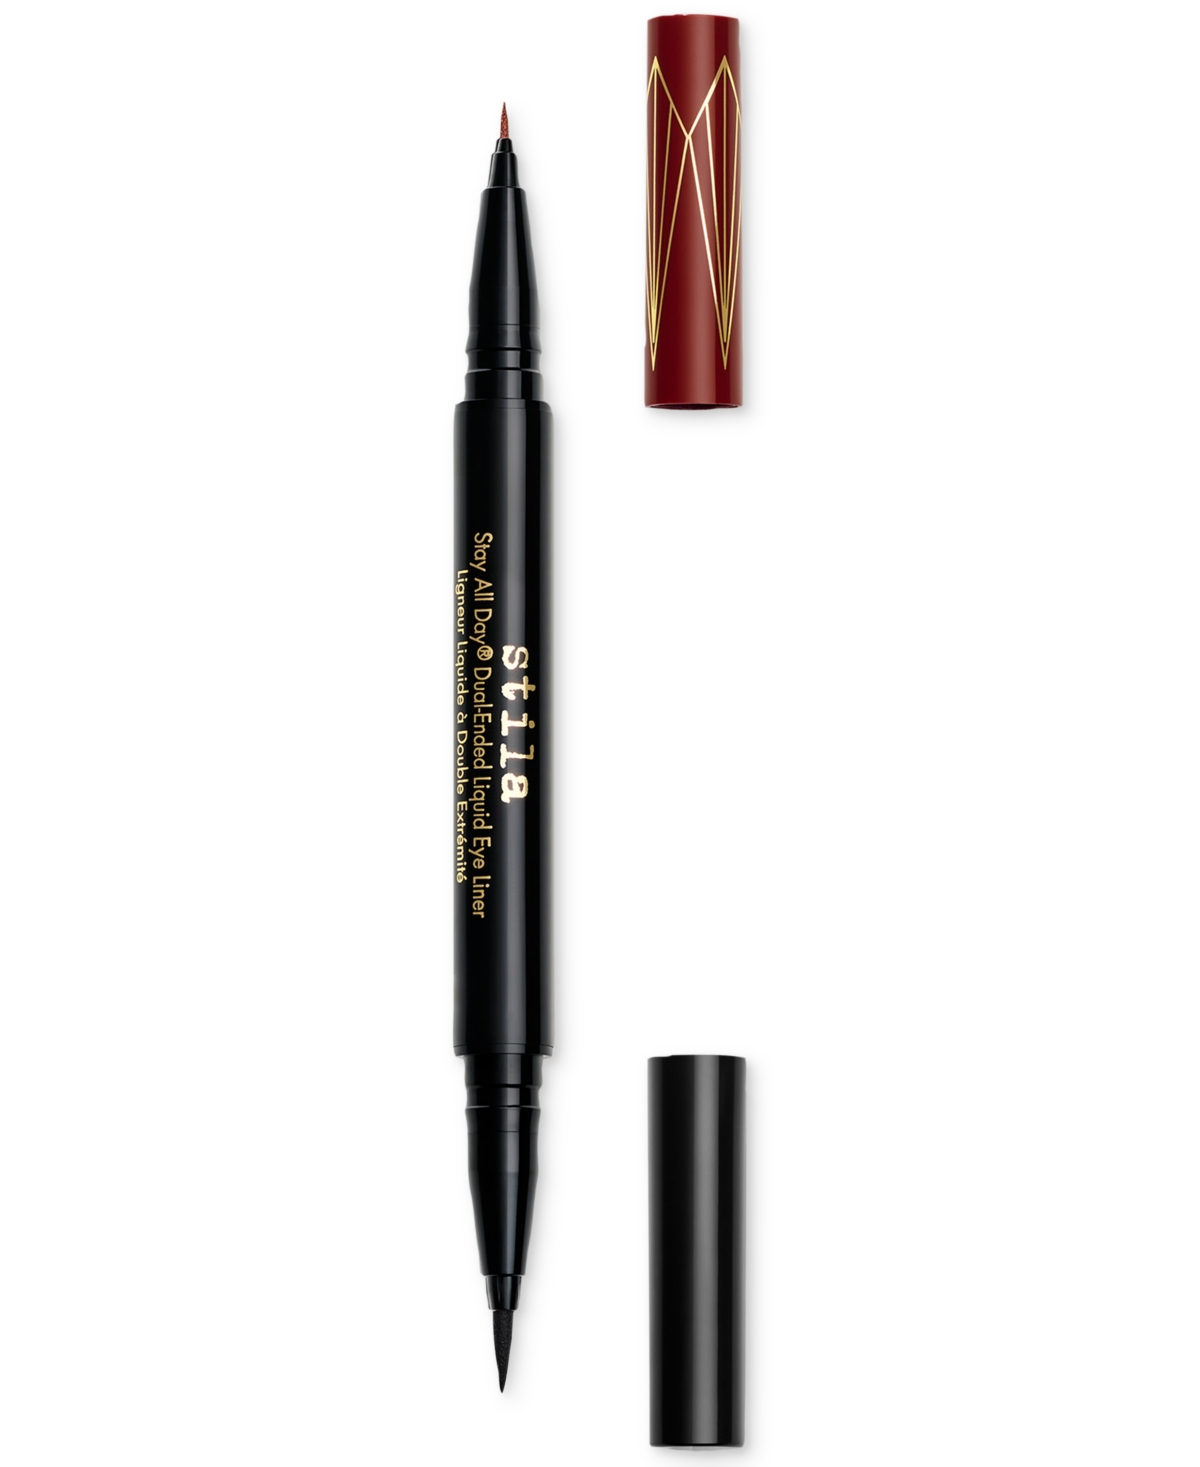 Stila Stay All Day Dual-ended Liquid Eye Liner In Sangria